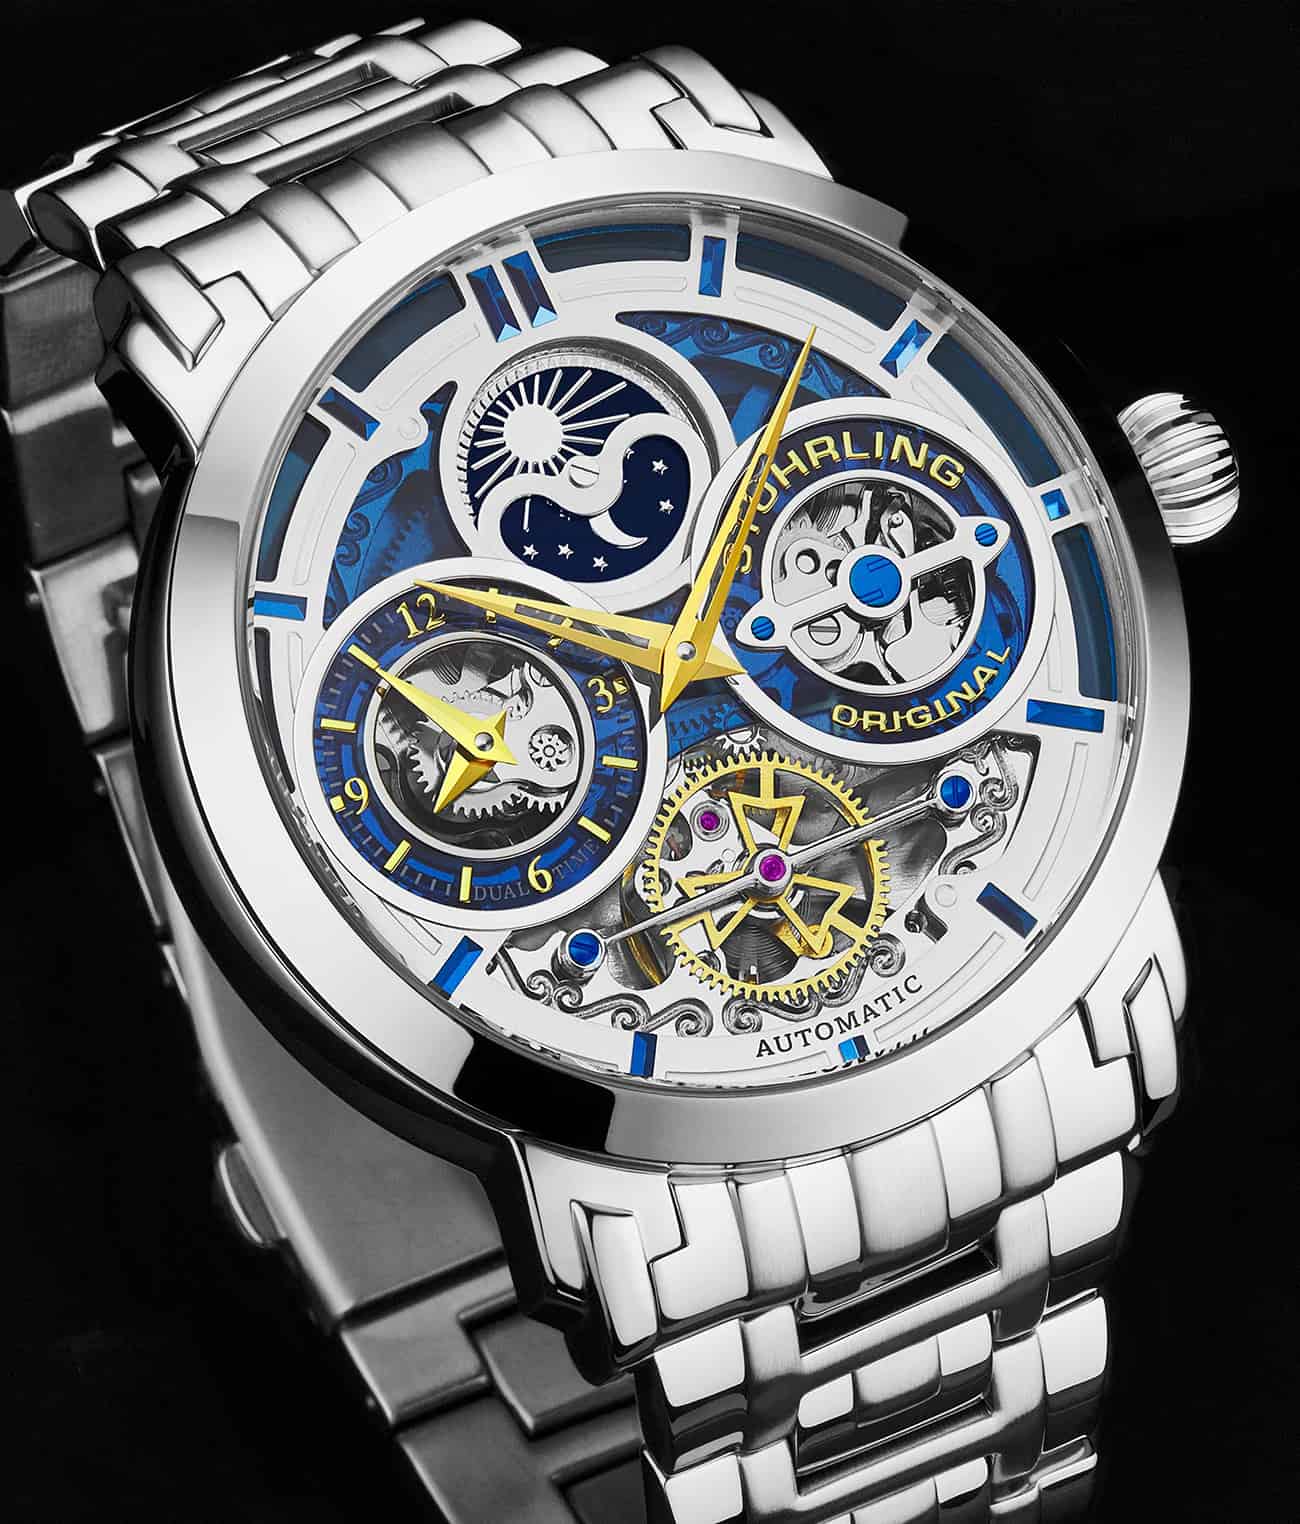 Luciano 371B Automatic 46mm Skeleton